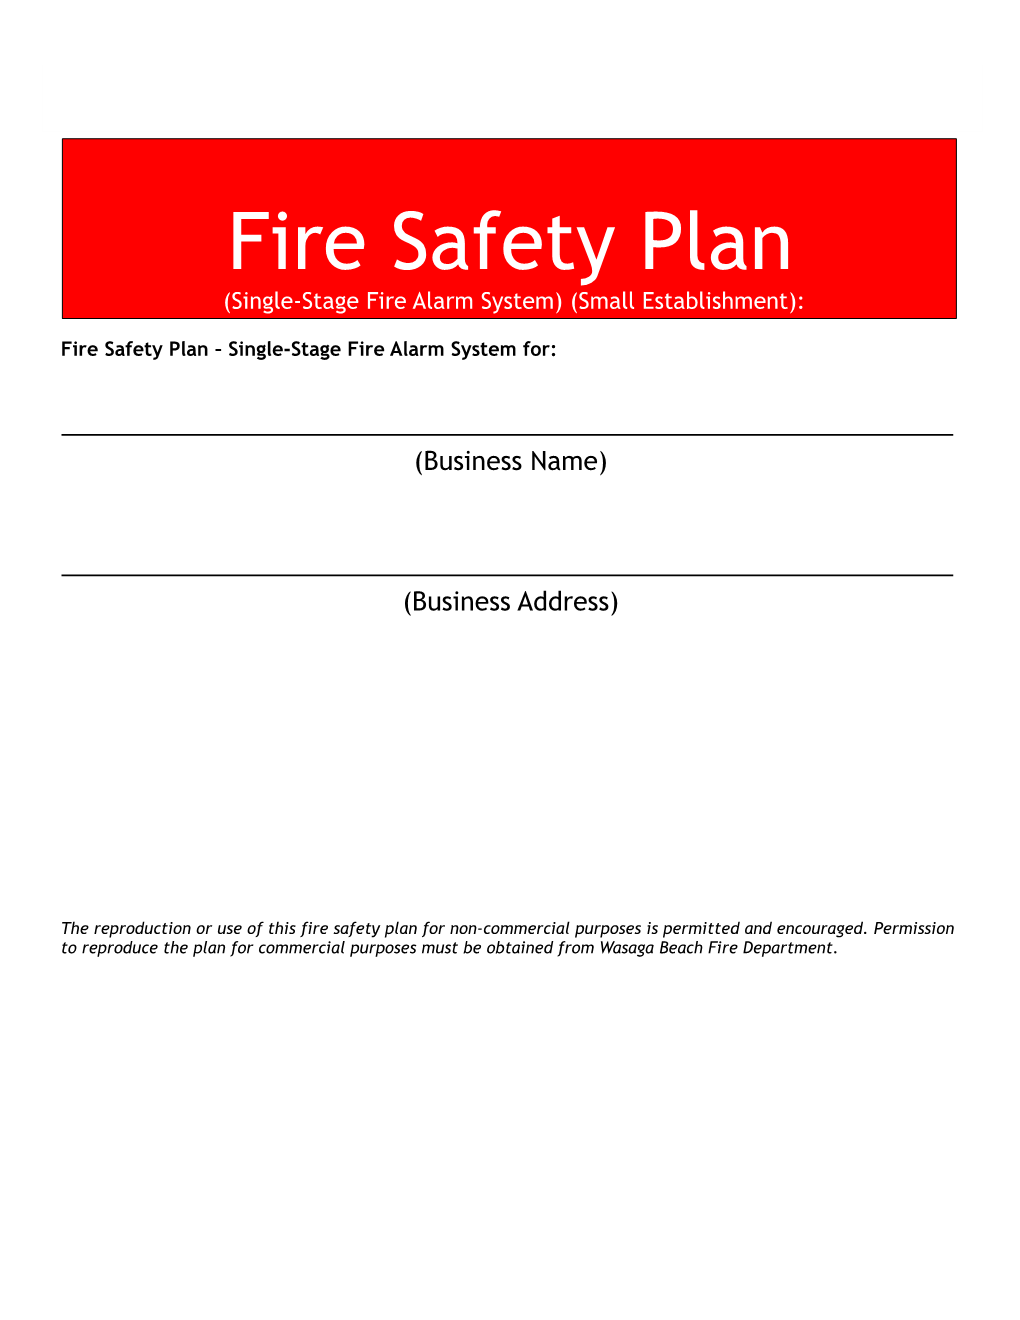 Fire Safety Plan Single-Stage Fire Alarm System For